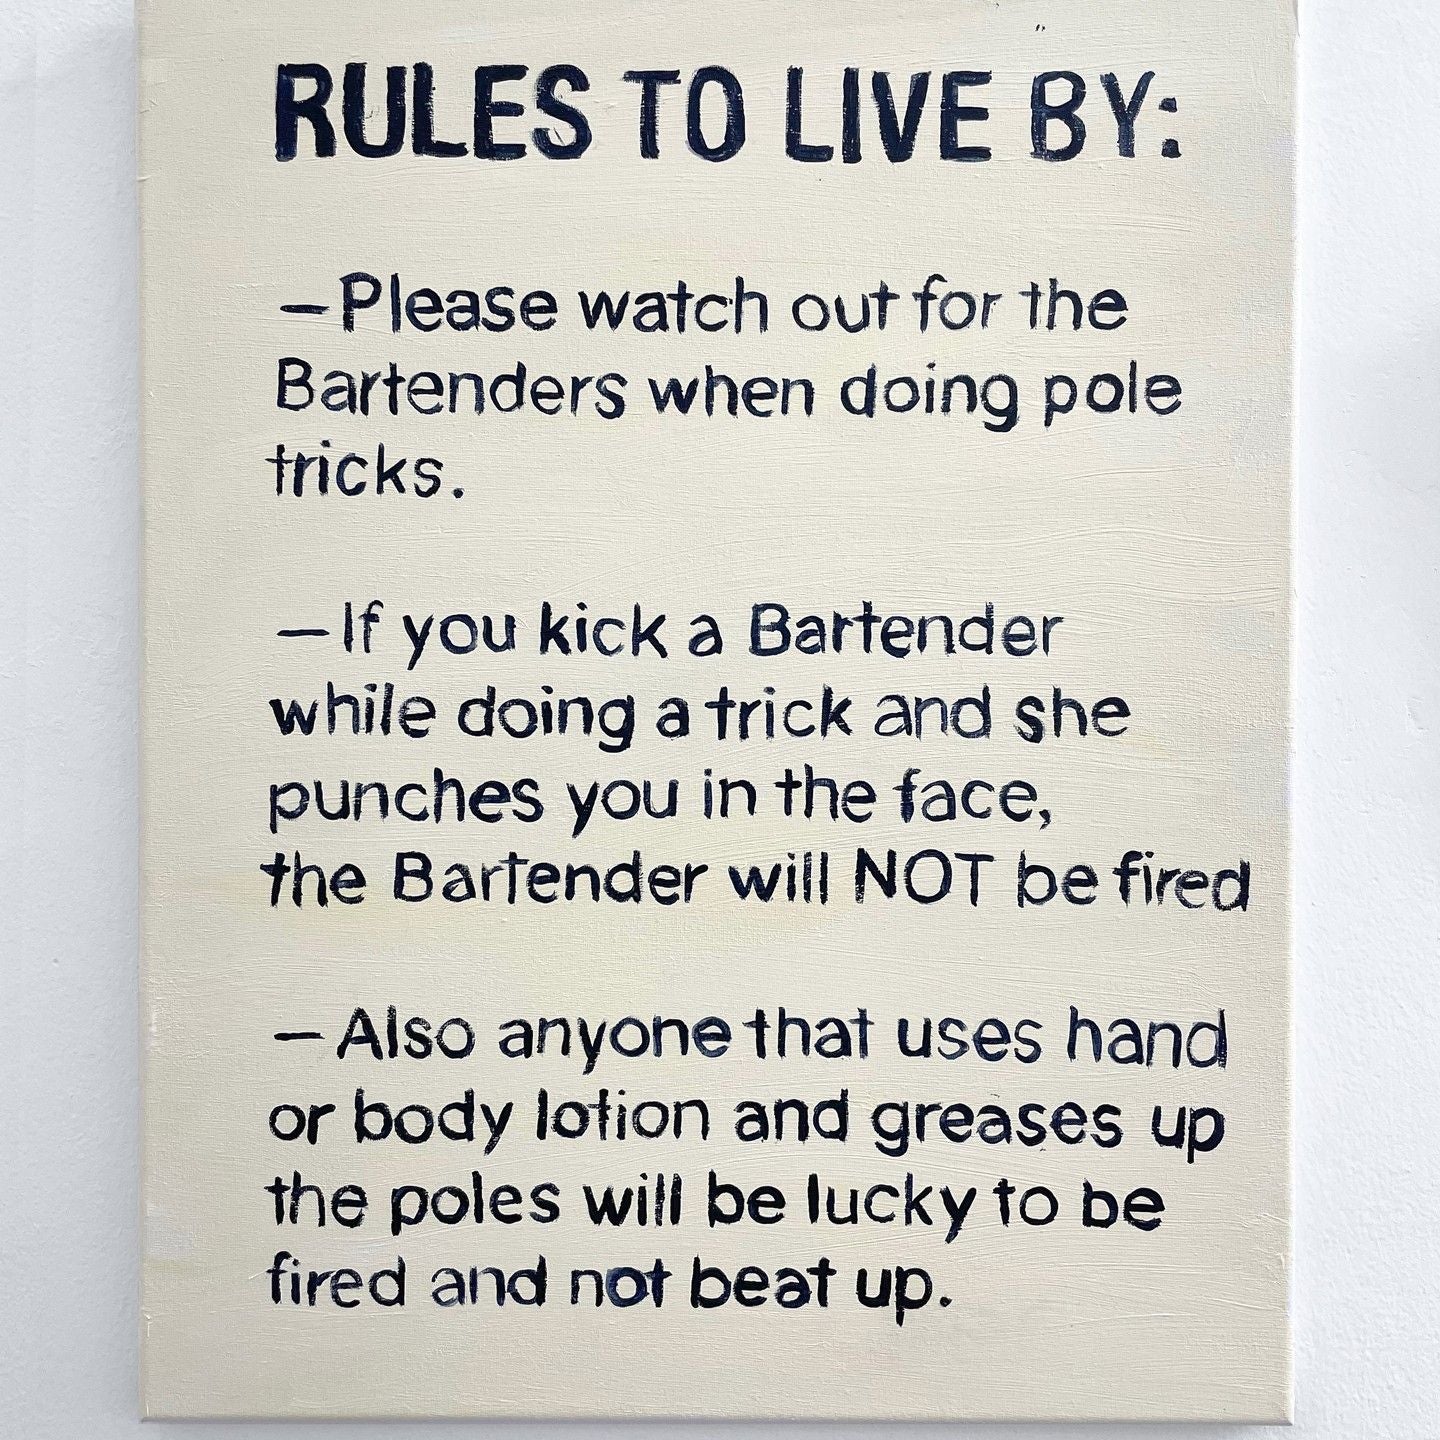 Lisa Levy, "Rules to Live By"